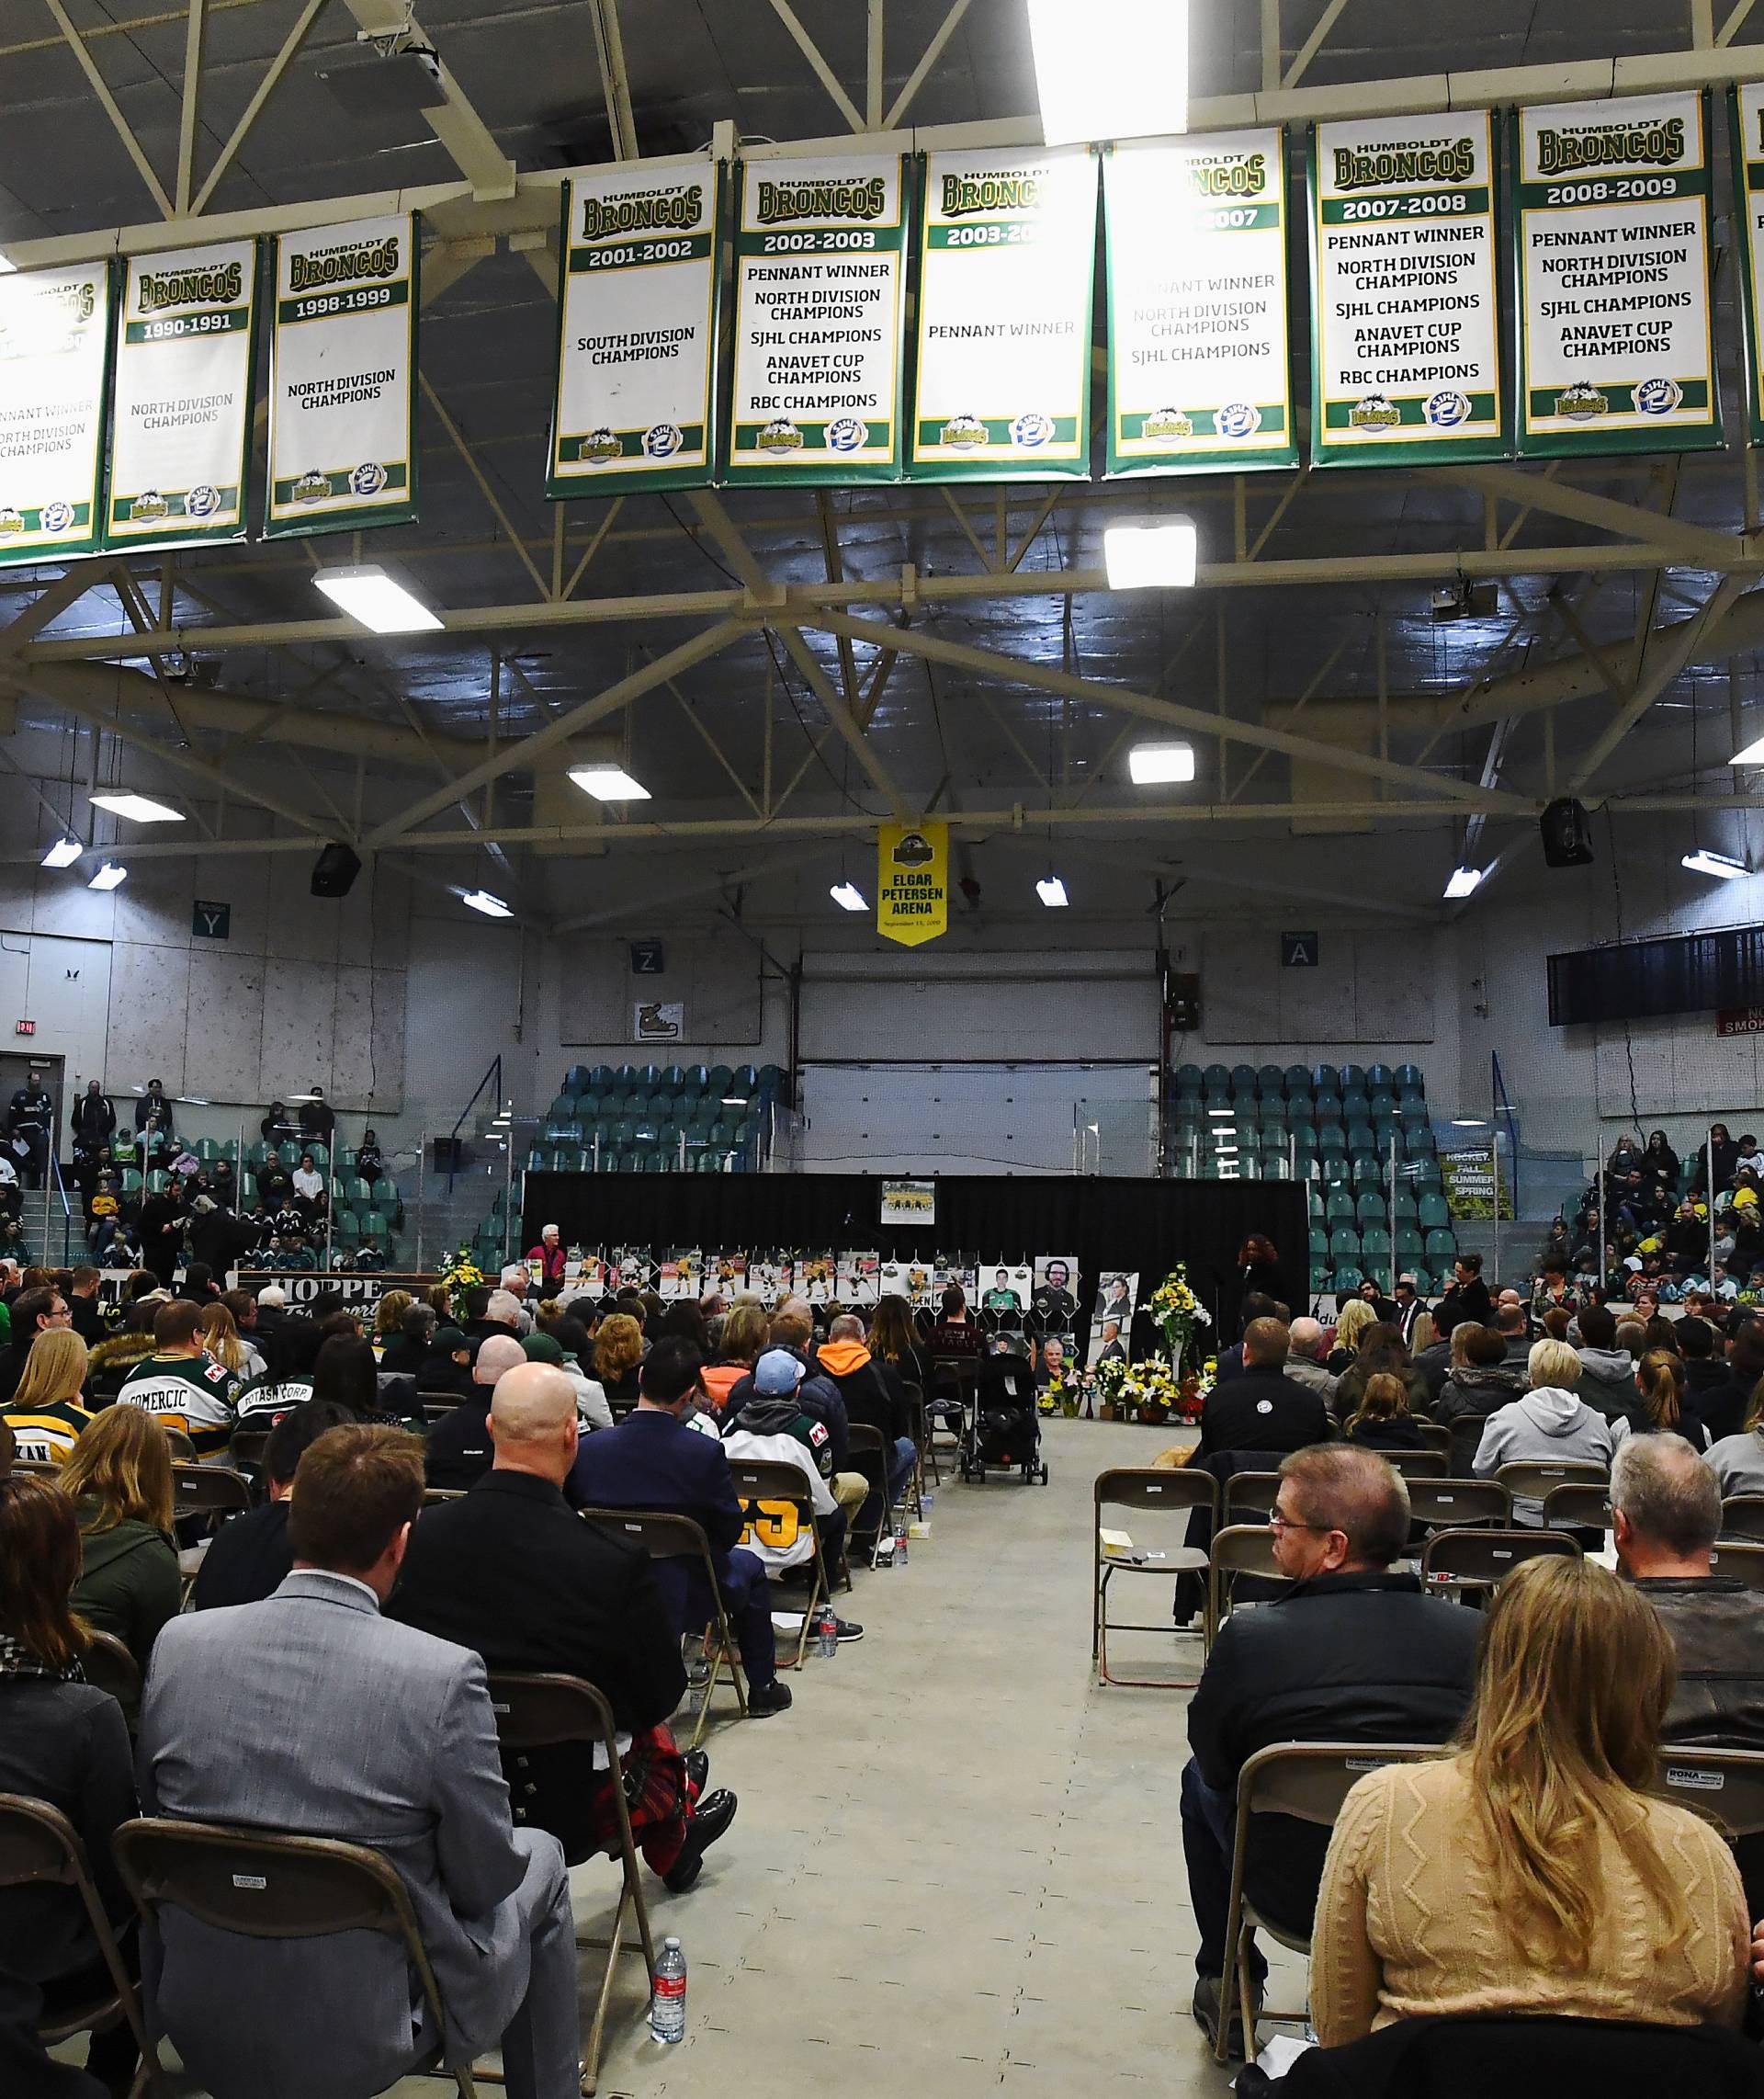 Mourners attend a vigil at the Elgar Petersen Arena, home of the Humboldt Broncos, to honour the victims of a fatal bus accident in Humboldt